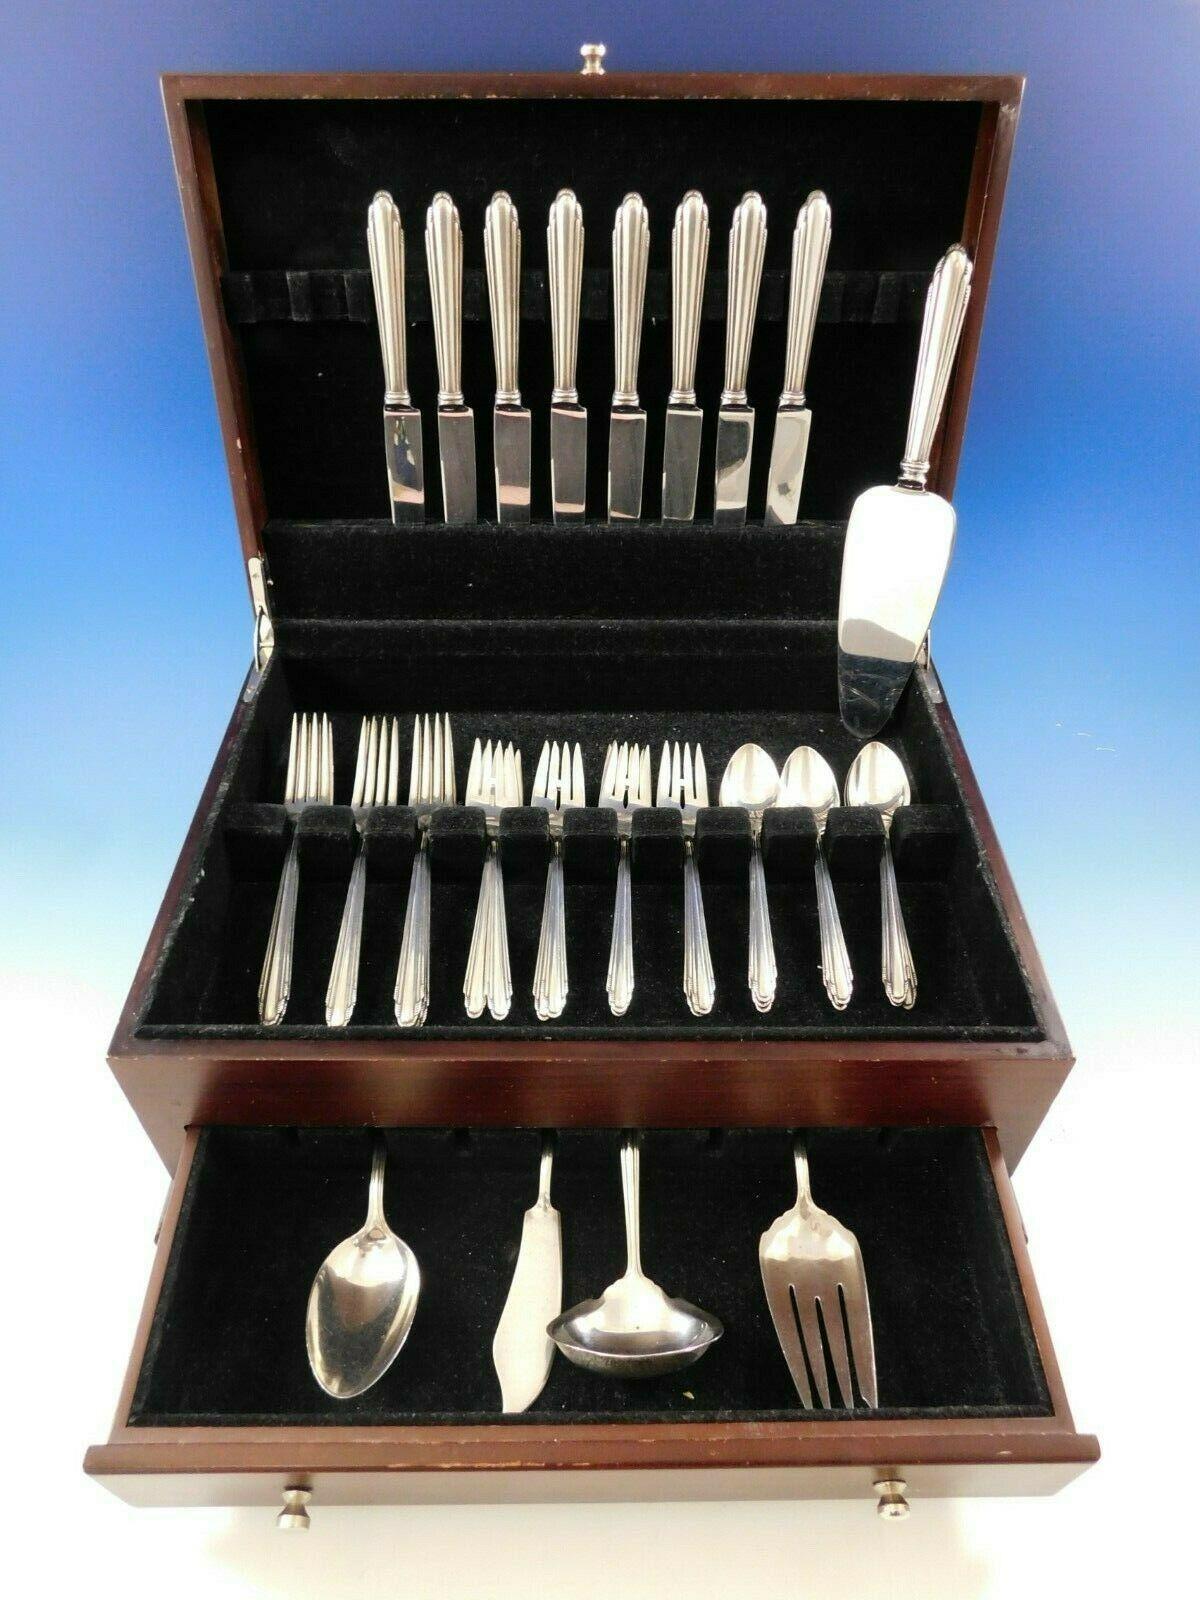 Art Deco Contempora by Dominick & Haff sterling silver flatware set - 37 pieces. This set includes:

8 knives, 8 3/4